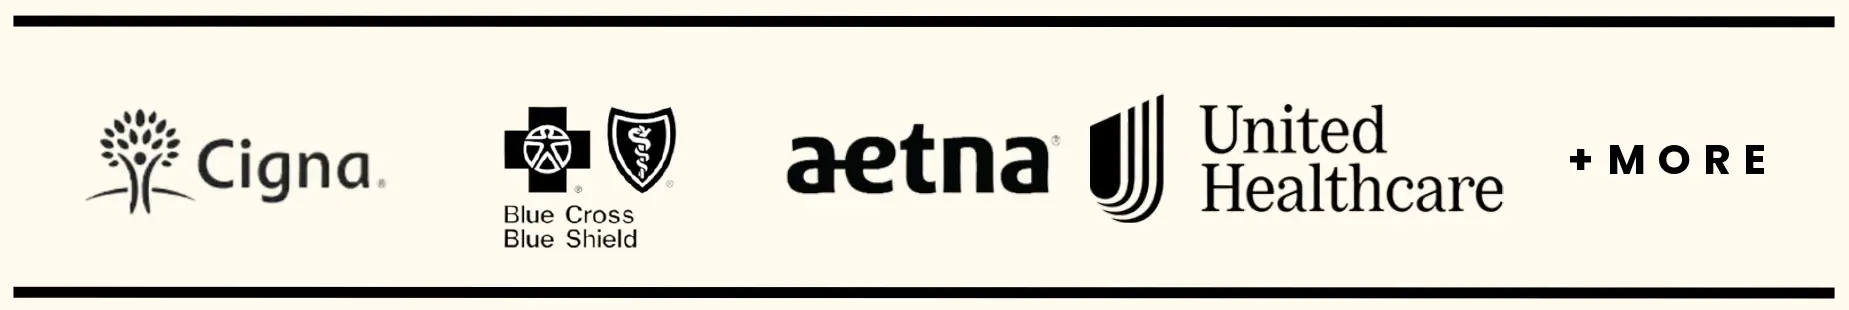 A black and white logo of aetna.